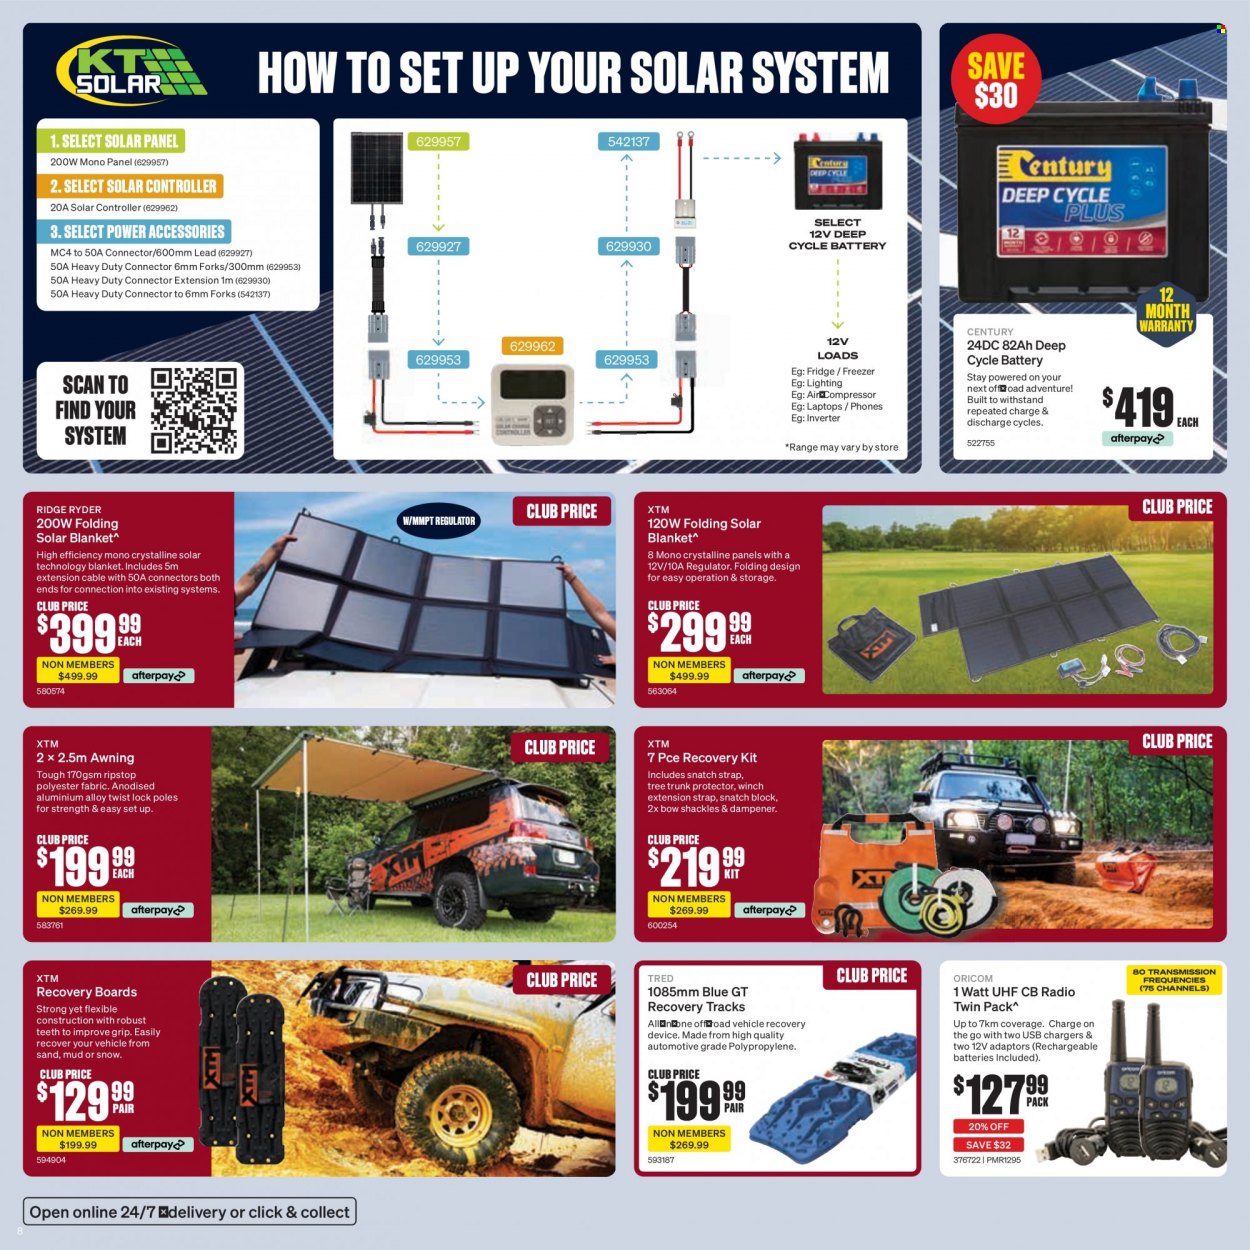 thumbnail - SuperCheap Auto mailer - 01.12.2022 - 11.12.2022 - Sales products - Ridge Ryder, radio, freezer, refrigerator, fridge, XTM, solar panel, solar blanket, air compressor, blanket, strap, recovery boards, deep cycle battery. Page 9.